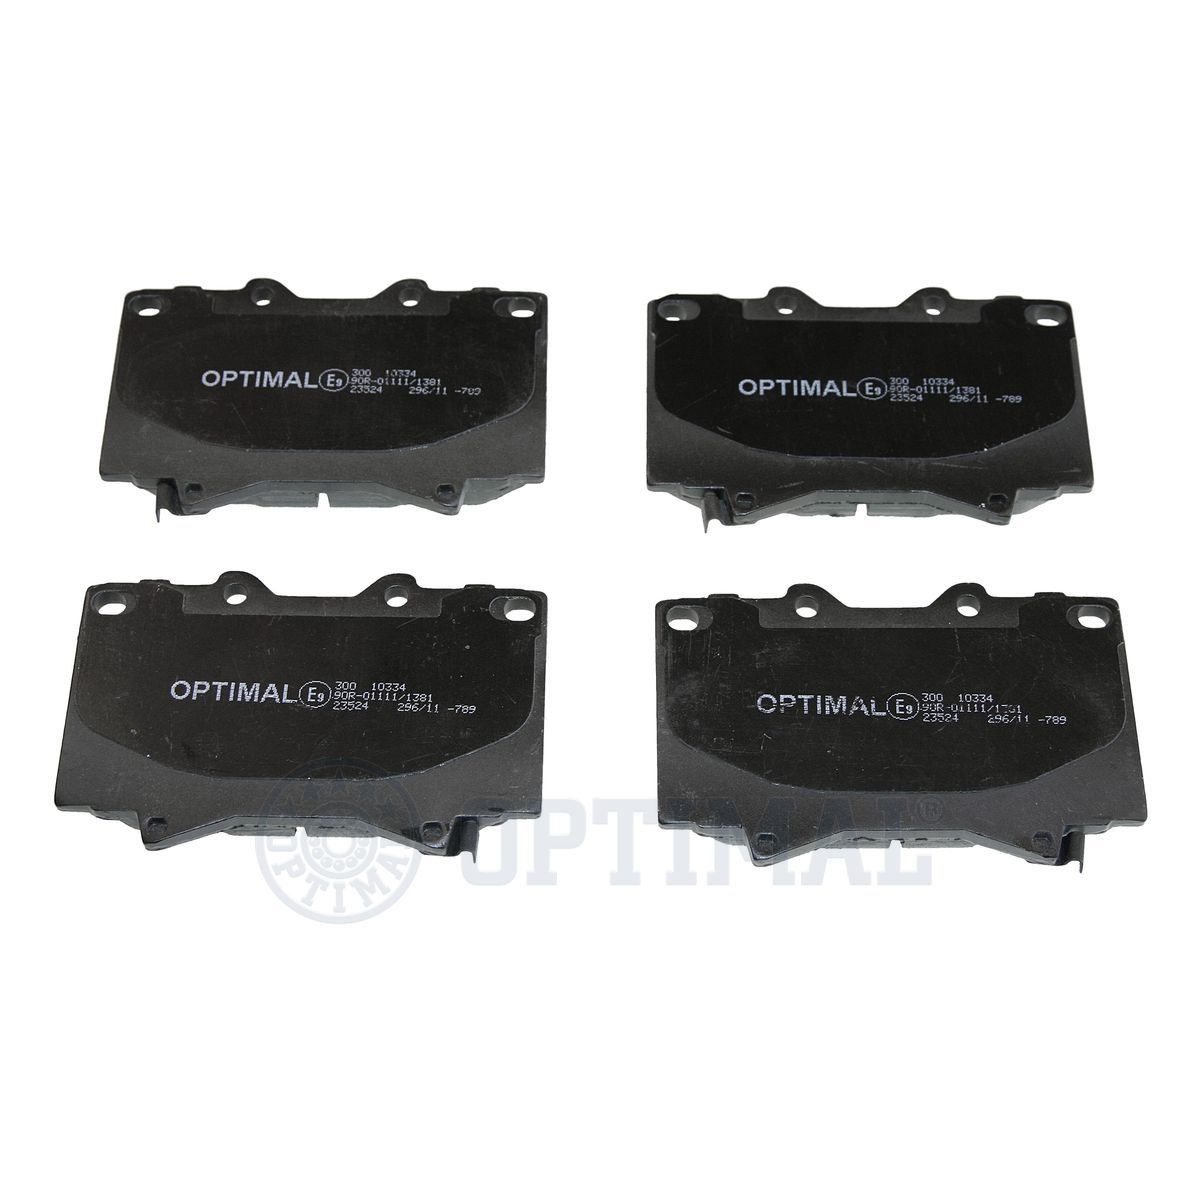 OPTIMAL BP-10334 Brake pad set Front Axle, with acoustic wear warning